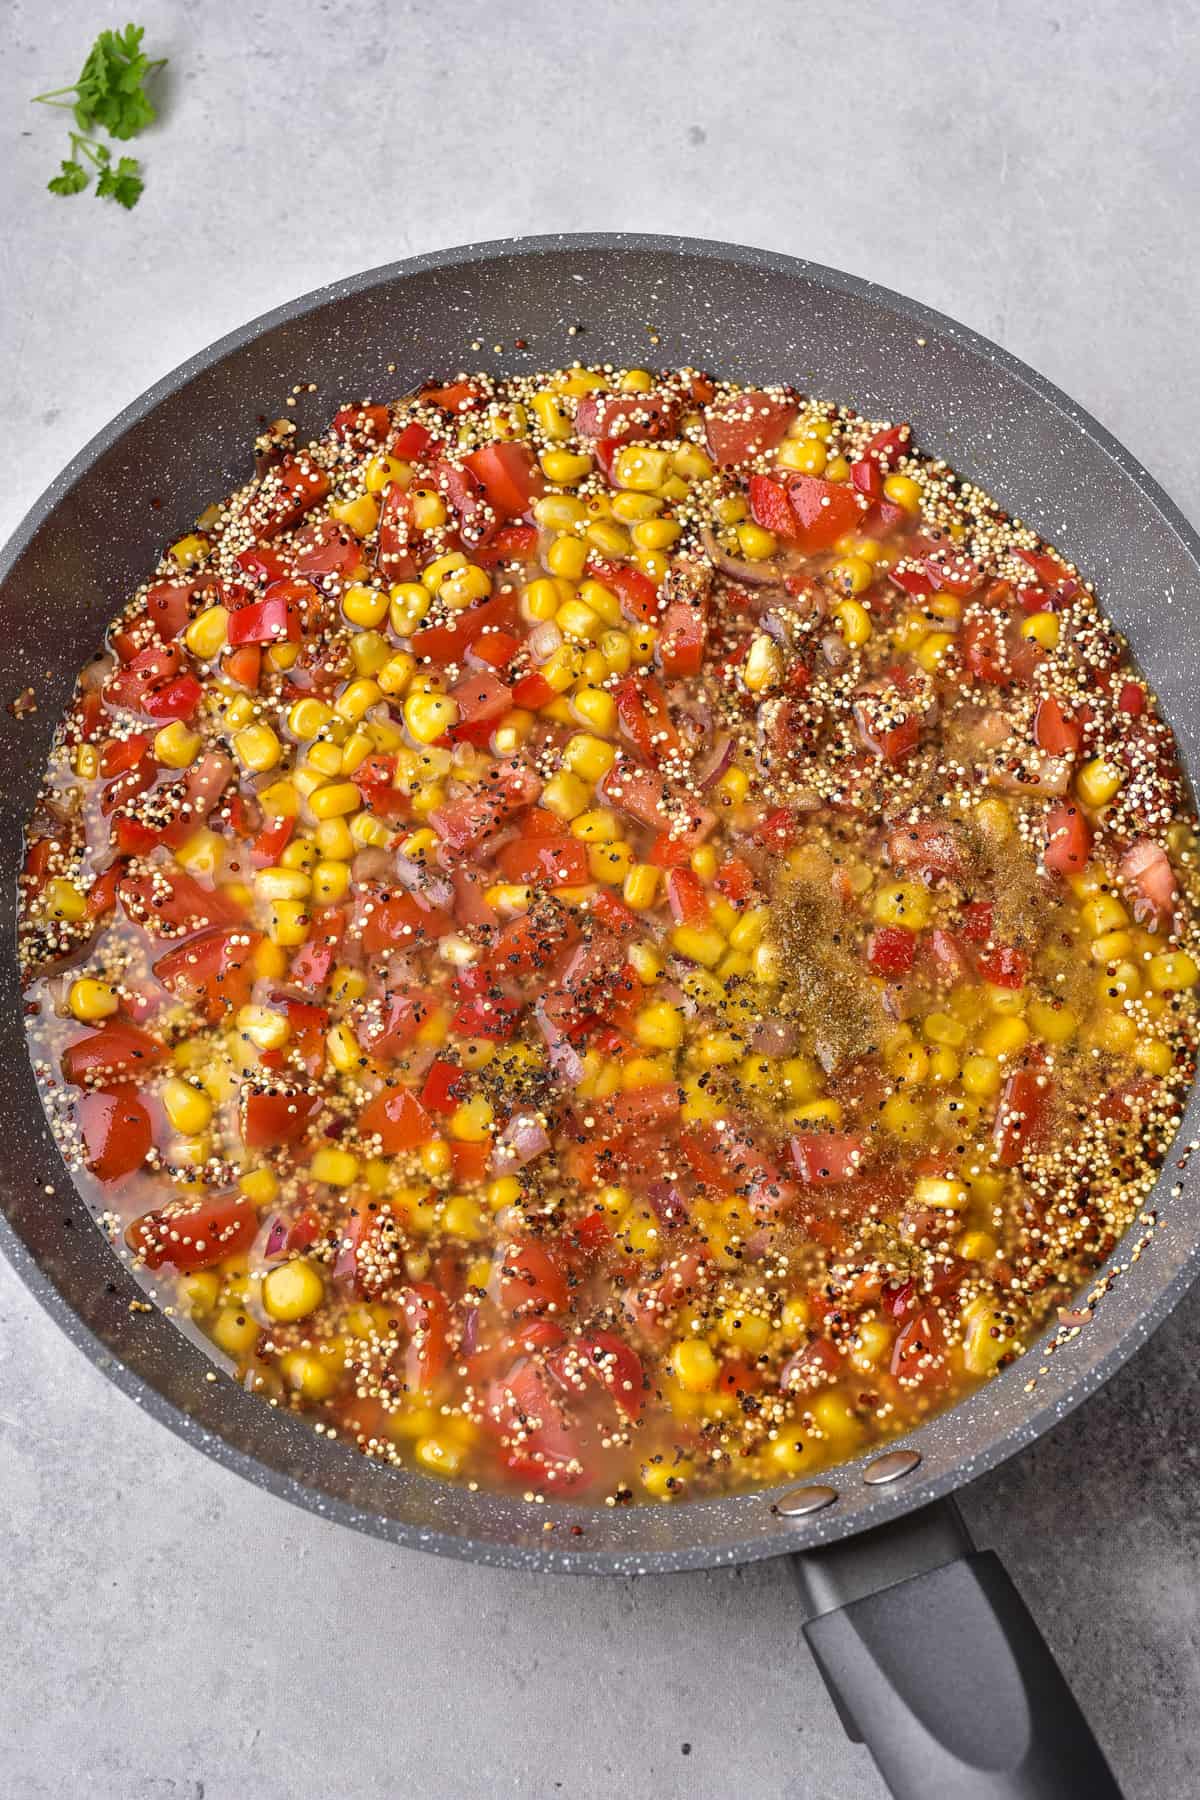 Red pepper, onions, tomatoes, corn, and quinoa with broth in a frying pan.